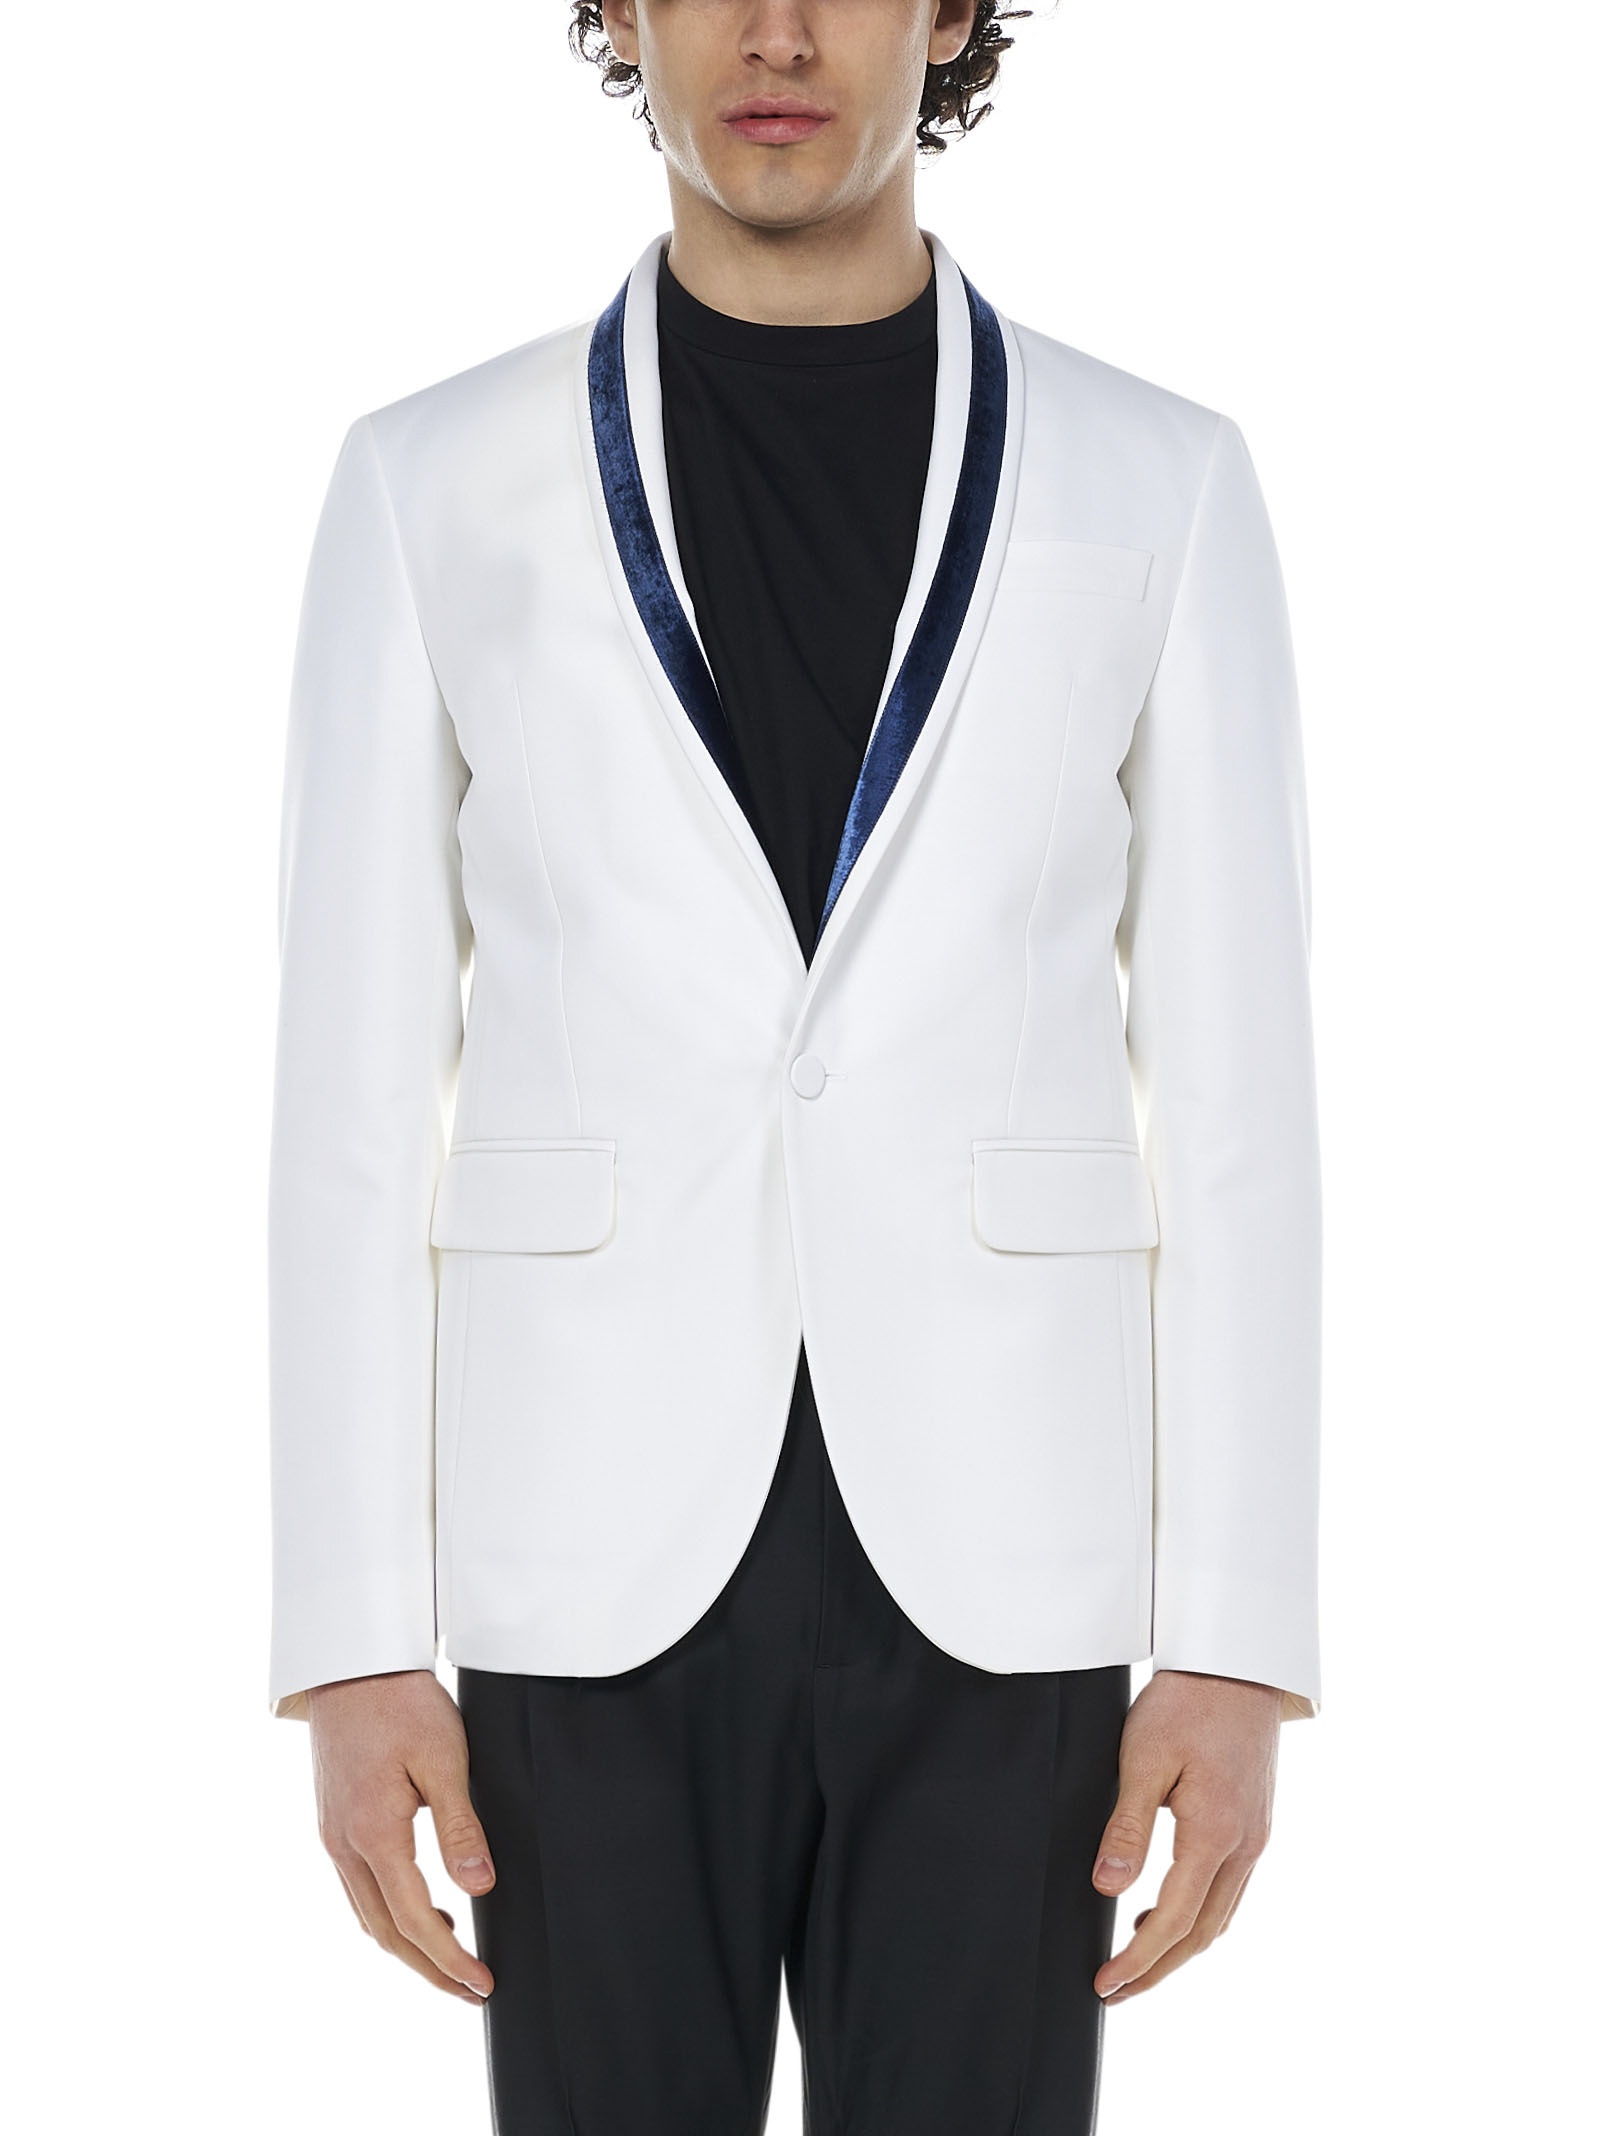 Tokyo suit with black tailored trousers and single-breasted blazer in white crêpe with blue velvet i - 2